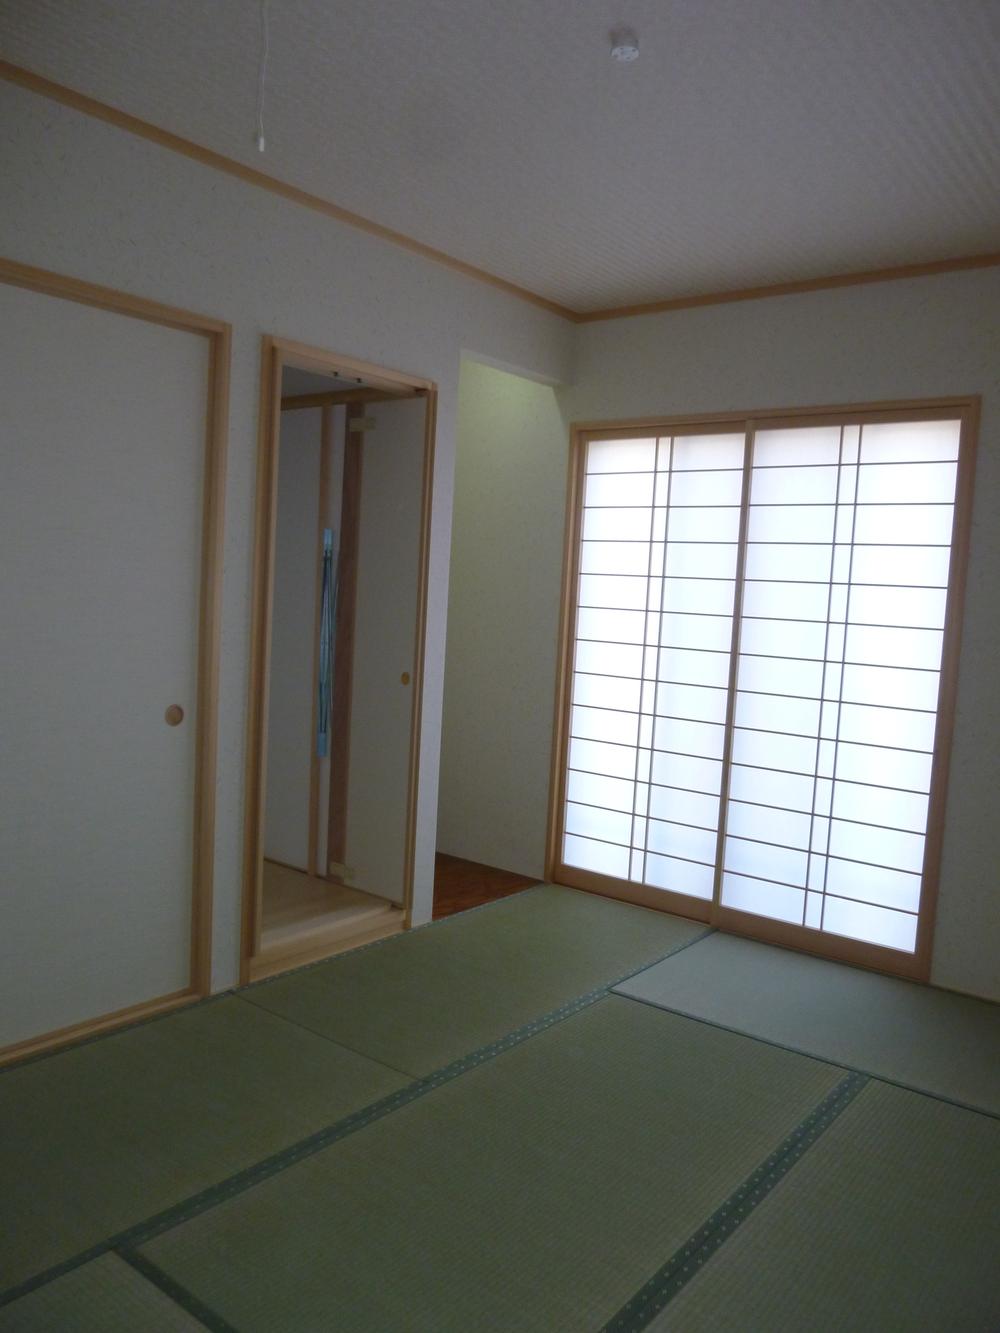 Other Equipment. The Japanese-style room, In addition to there is a alcove and a Buddhist altar room with the door of the closet, Full specifications.